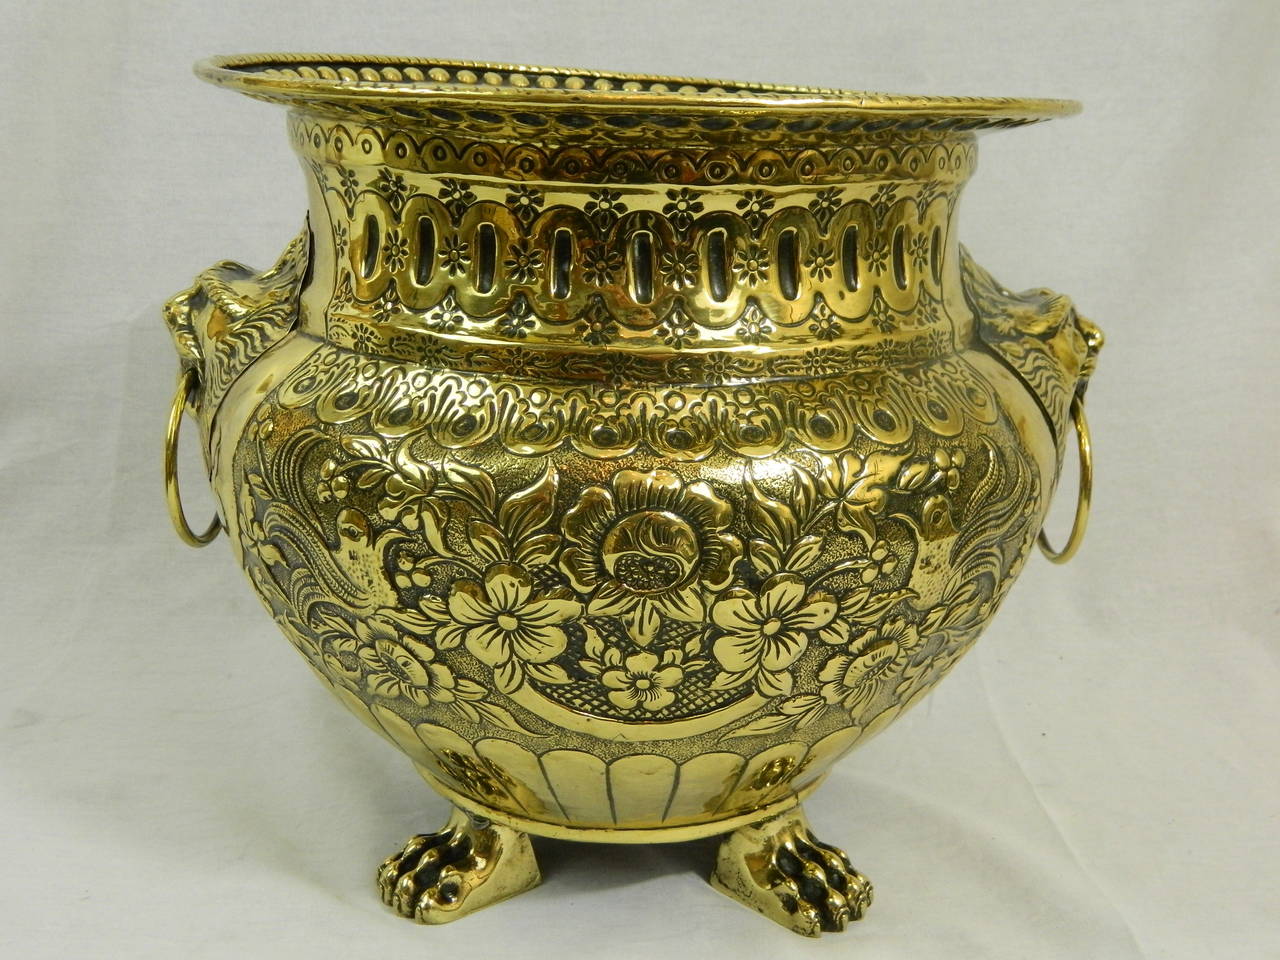 19th Century Polished Brass Large Jardiniere or Planter with Original Liner on Cast Feet